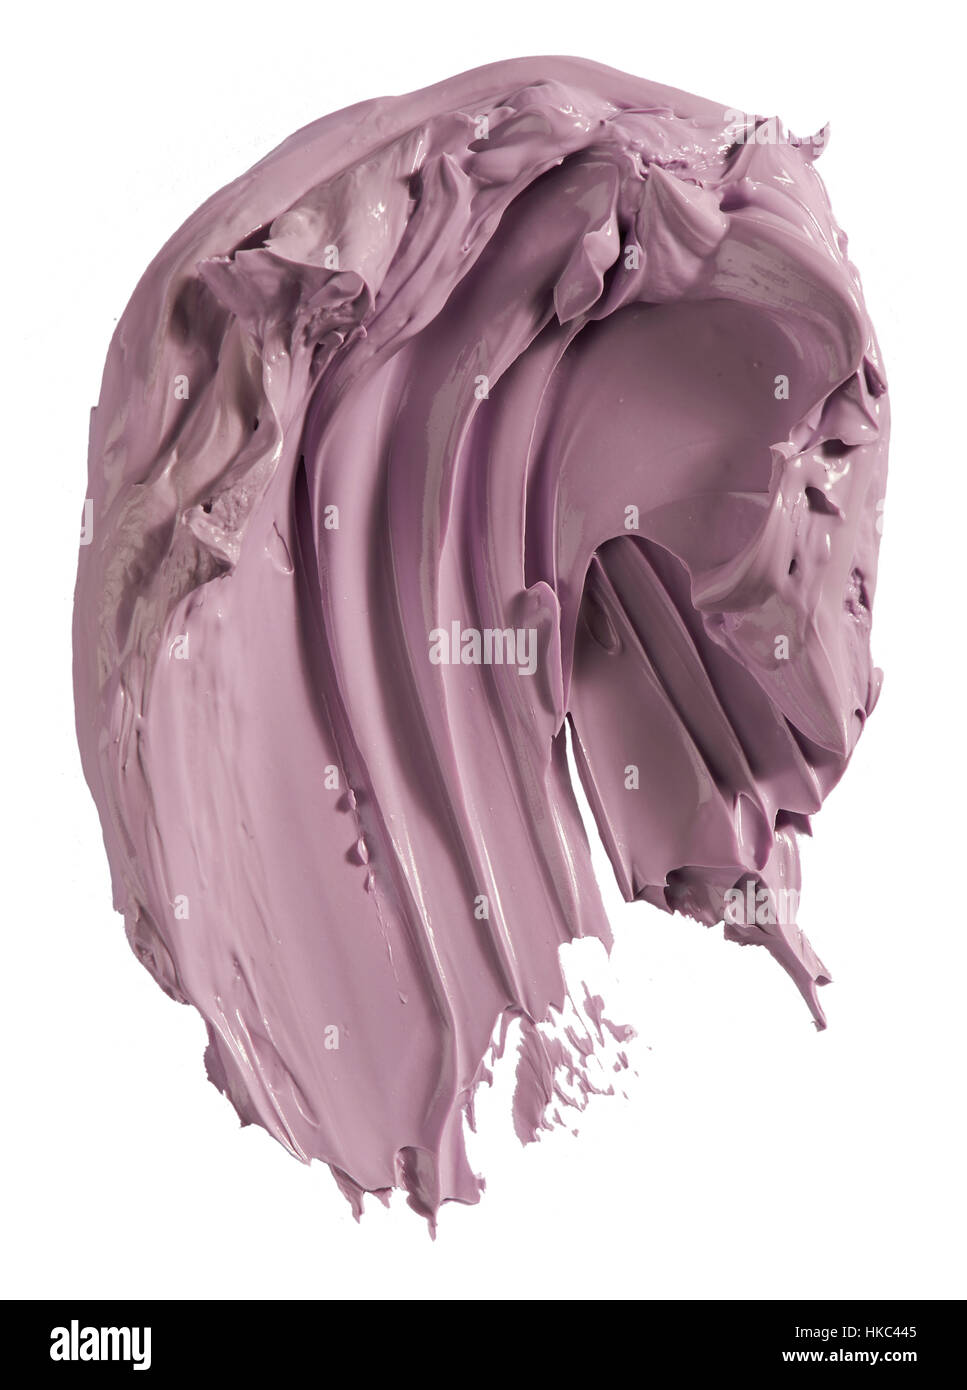 A cut out beauty image of a sample of pink face mask. Stock Photo